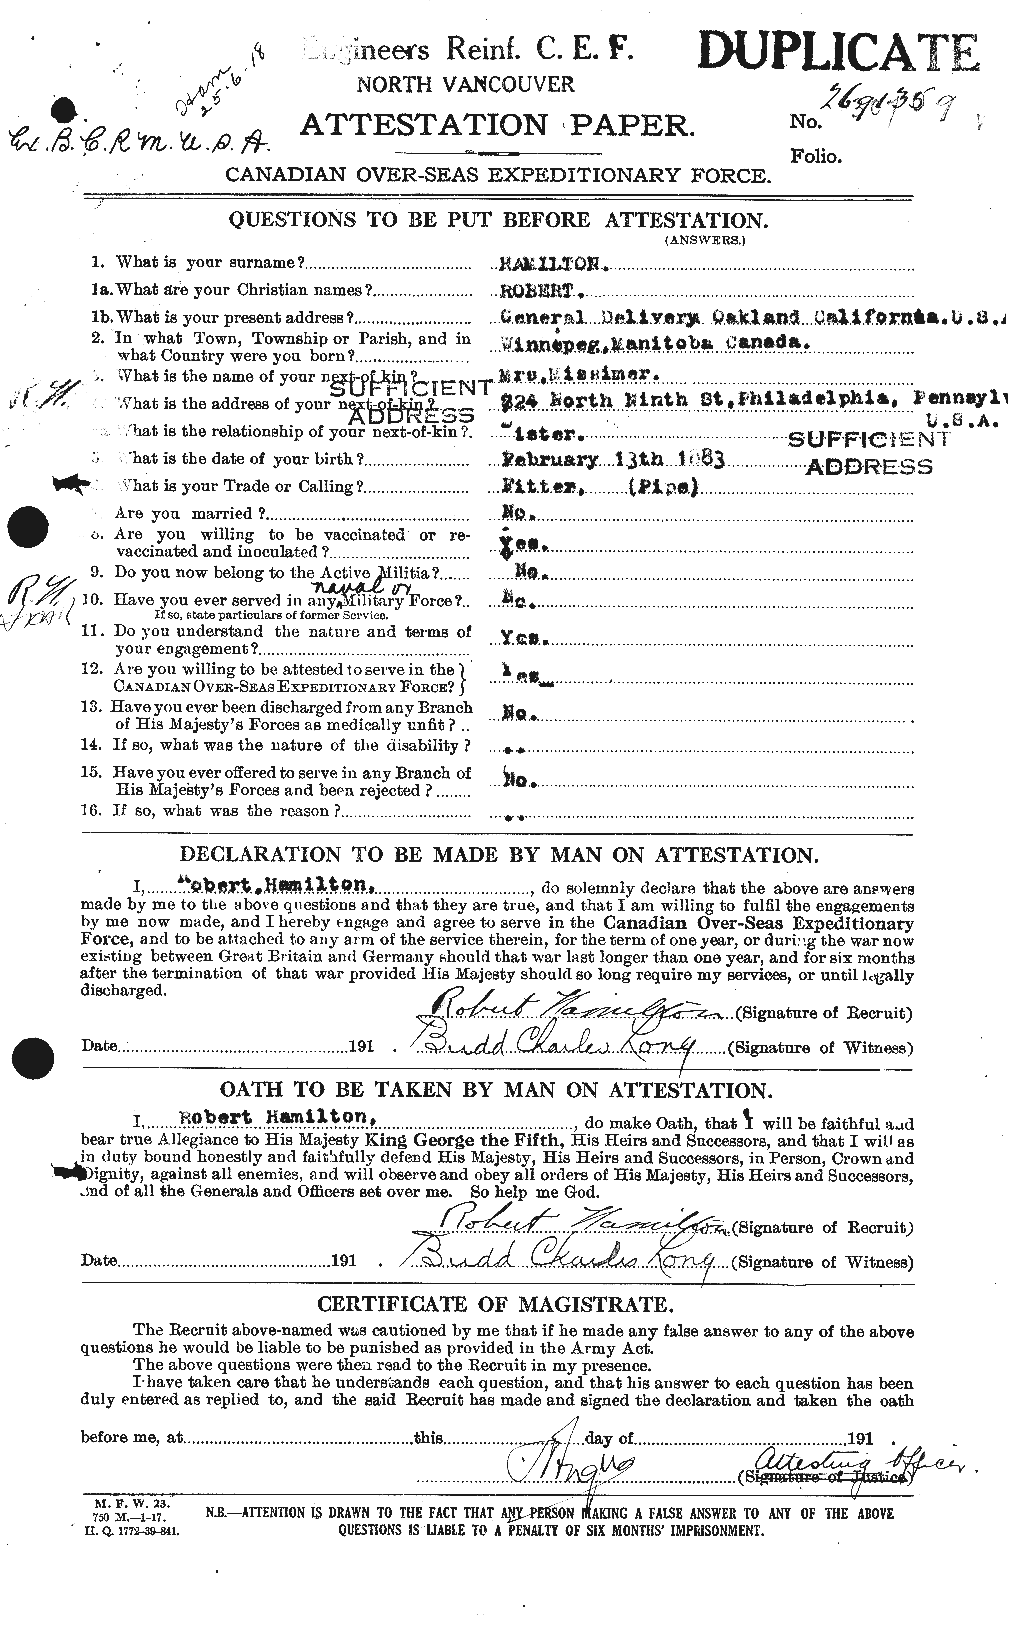 Personnel Records of the First World War - CEF 373221a